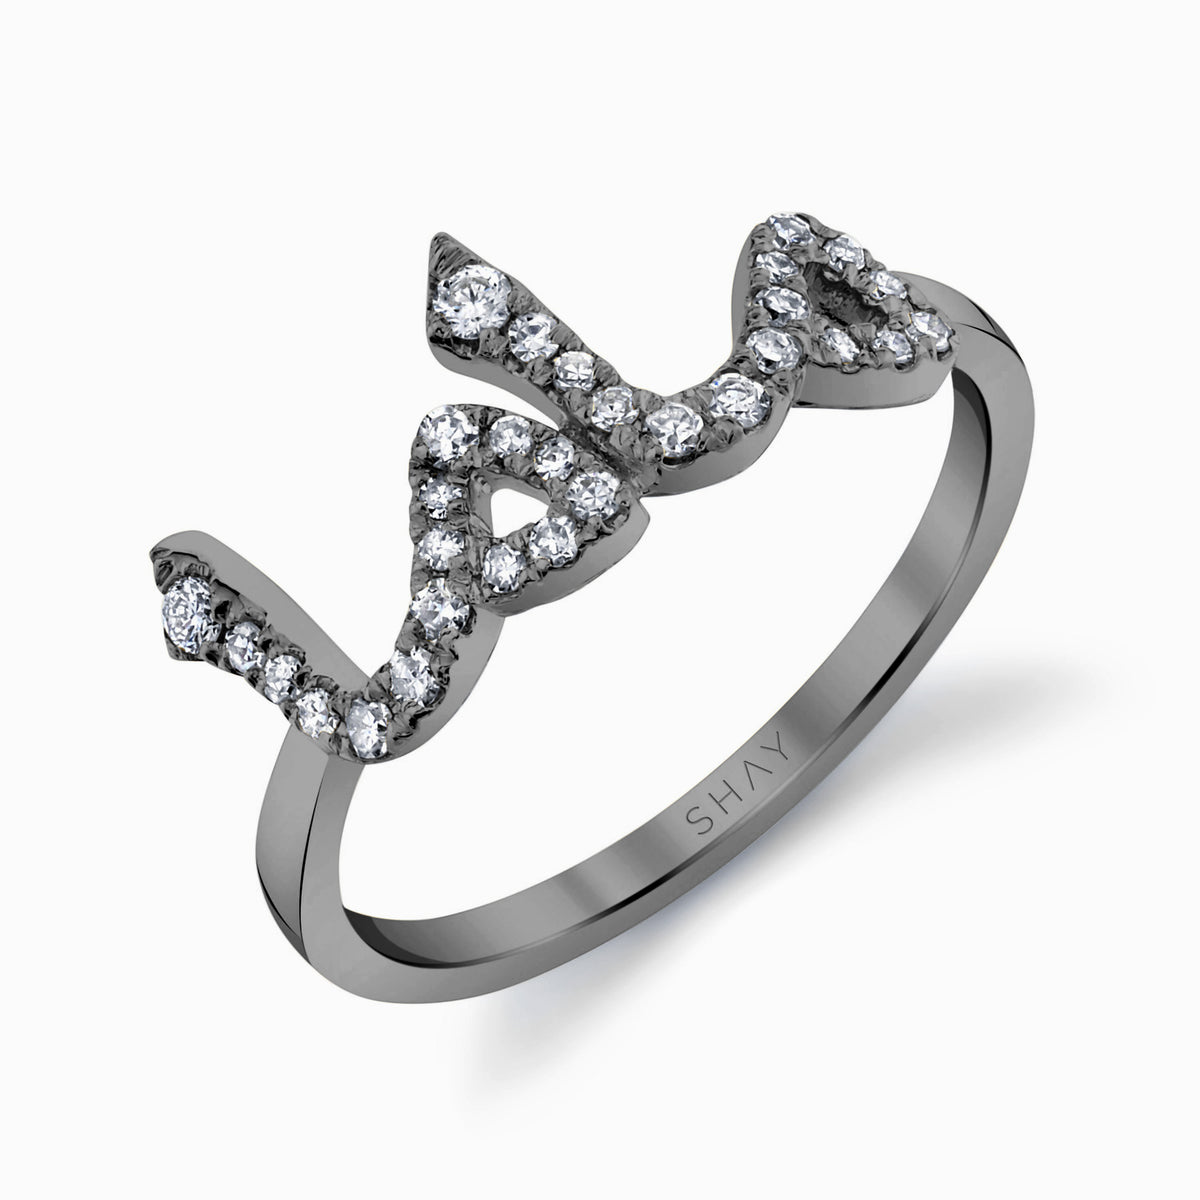 DIAMOND PAVE PERSONALIZED 4 LETTER ARABIC RING